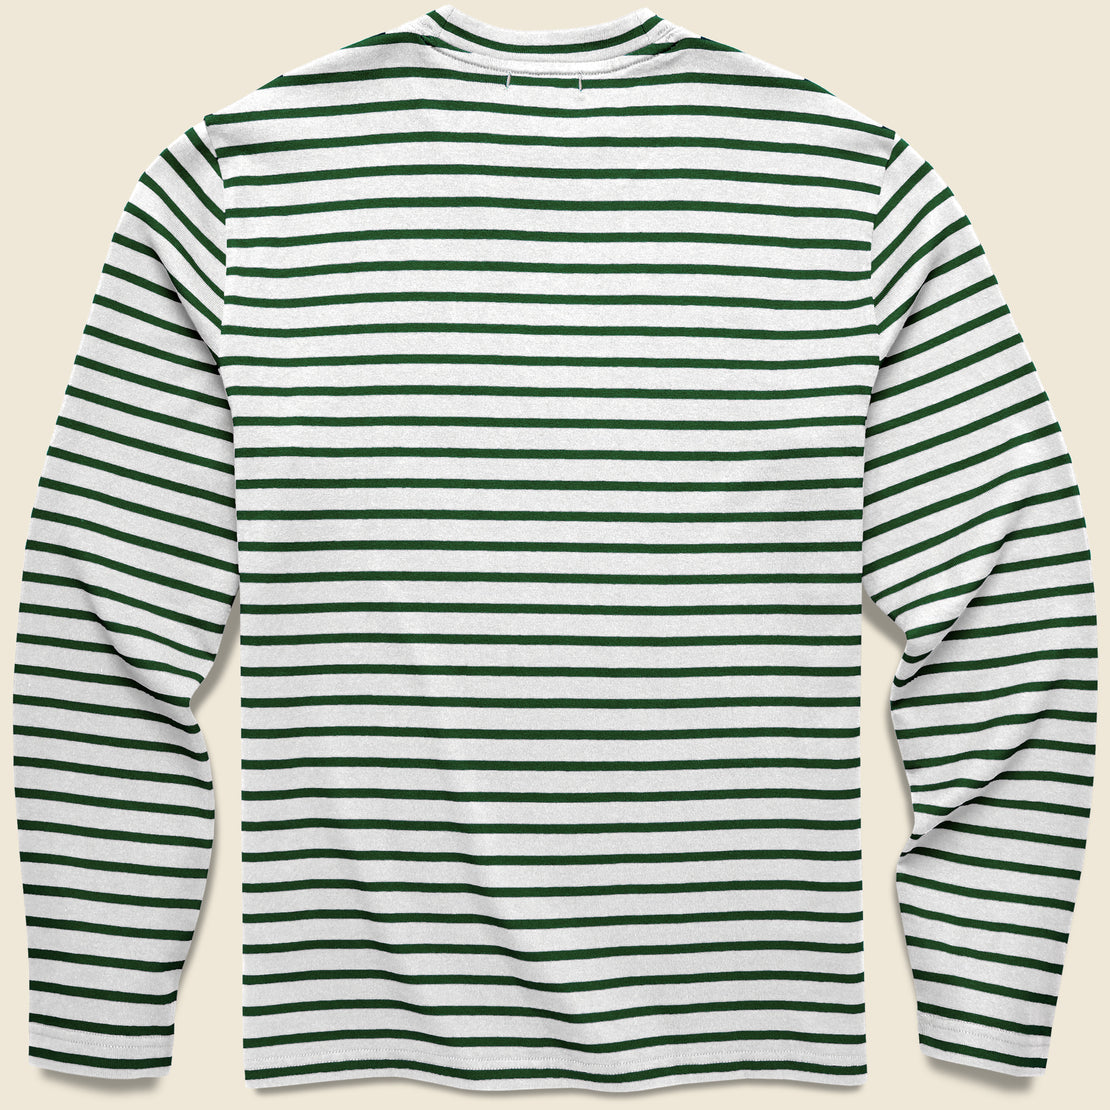 Striped Touch Down Tee - Pine Grove - Alex Mill - STAG Provisions - Tops - L/S Knit